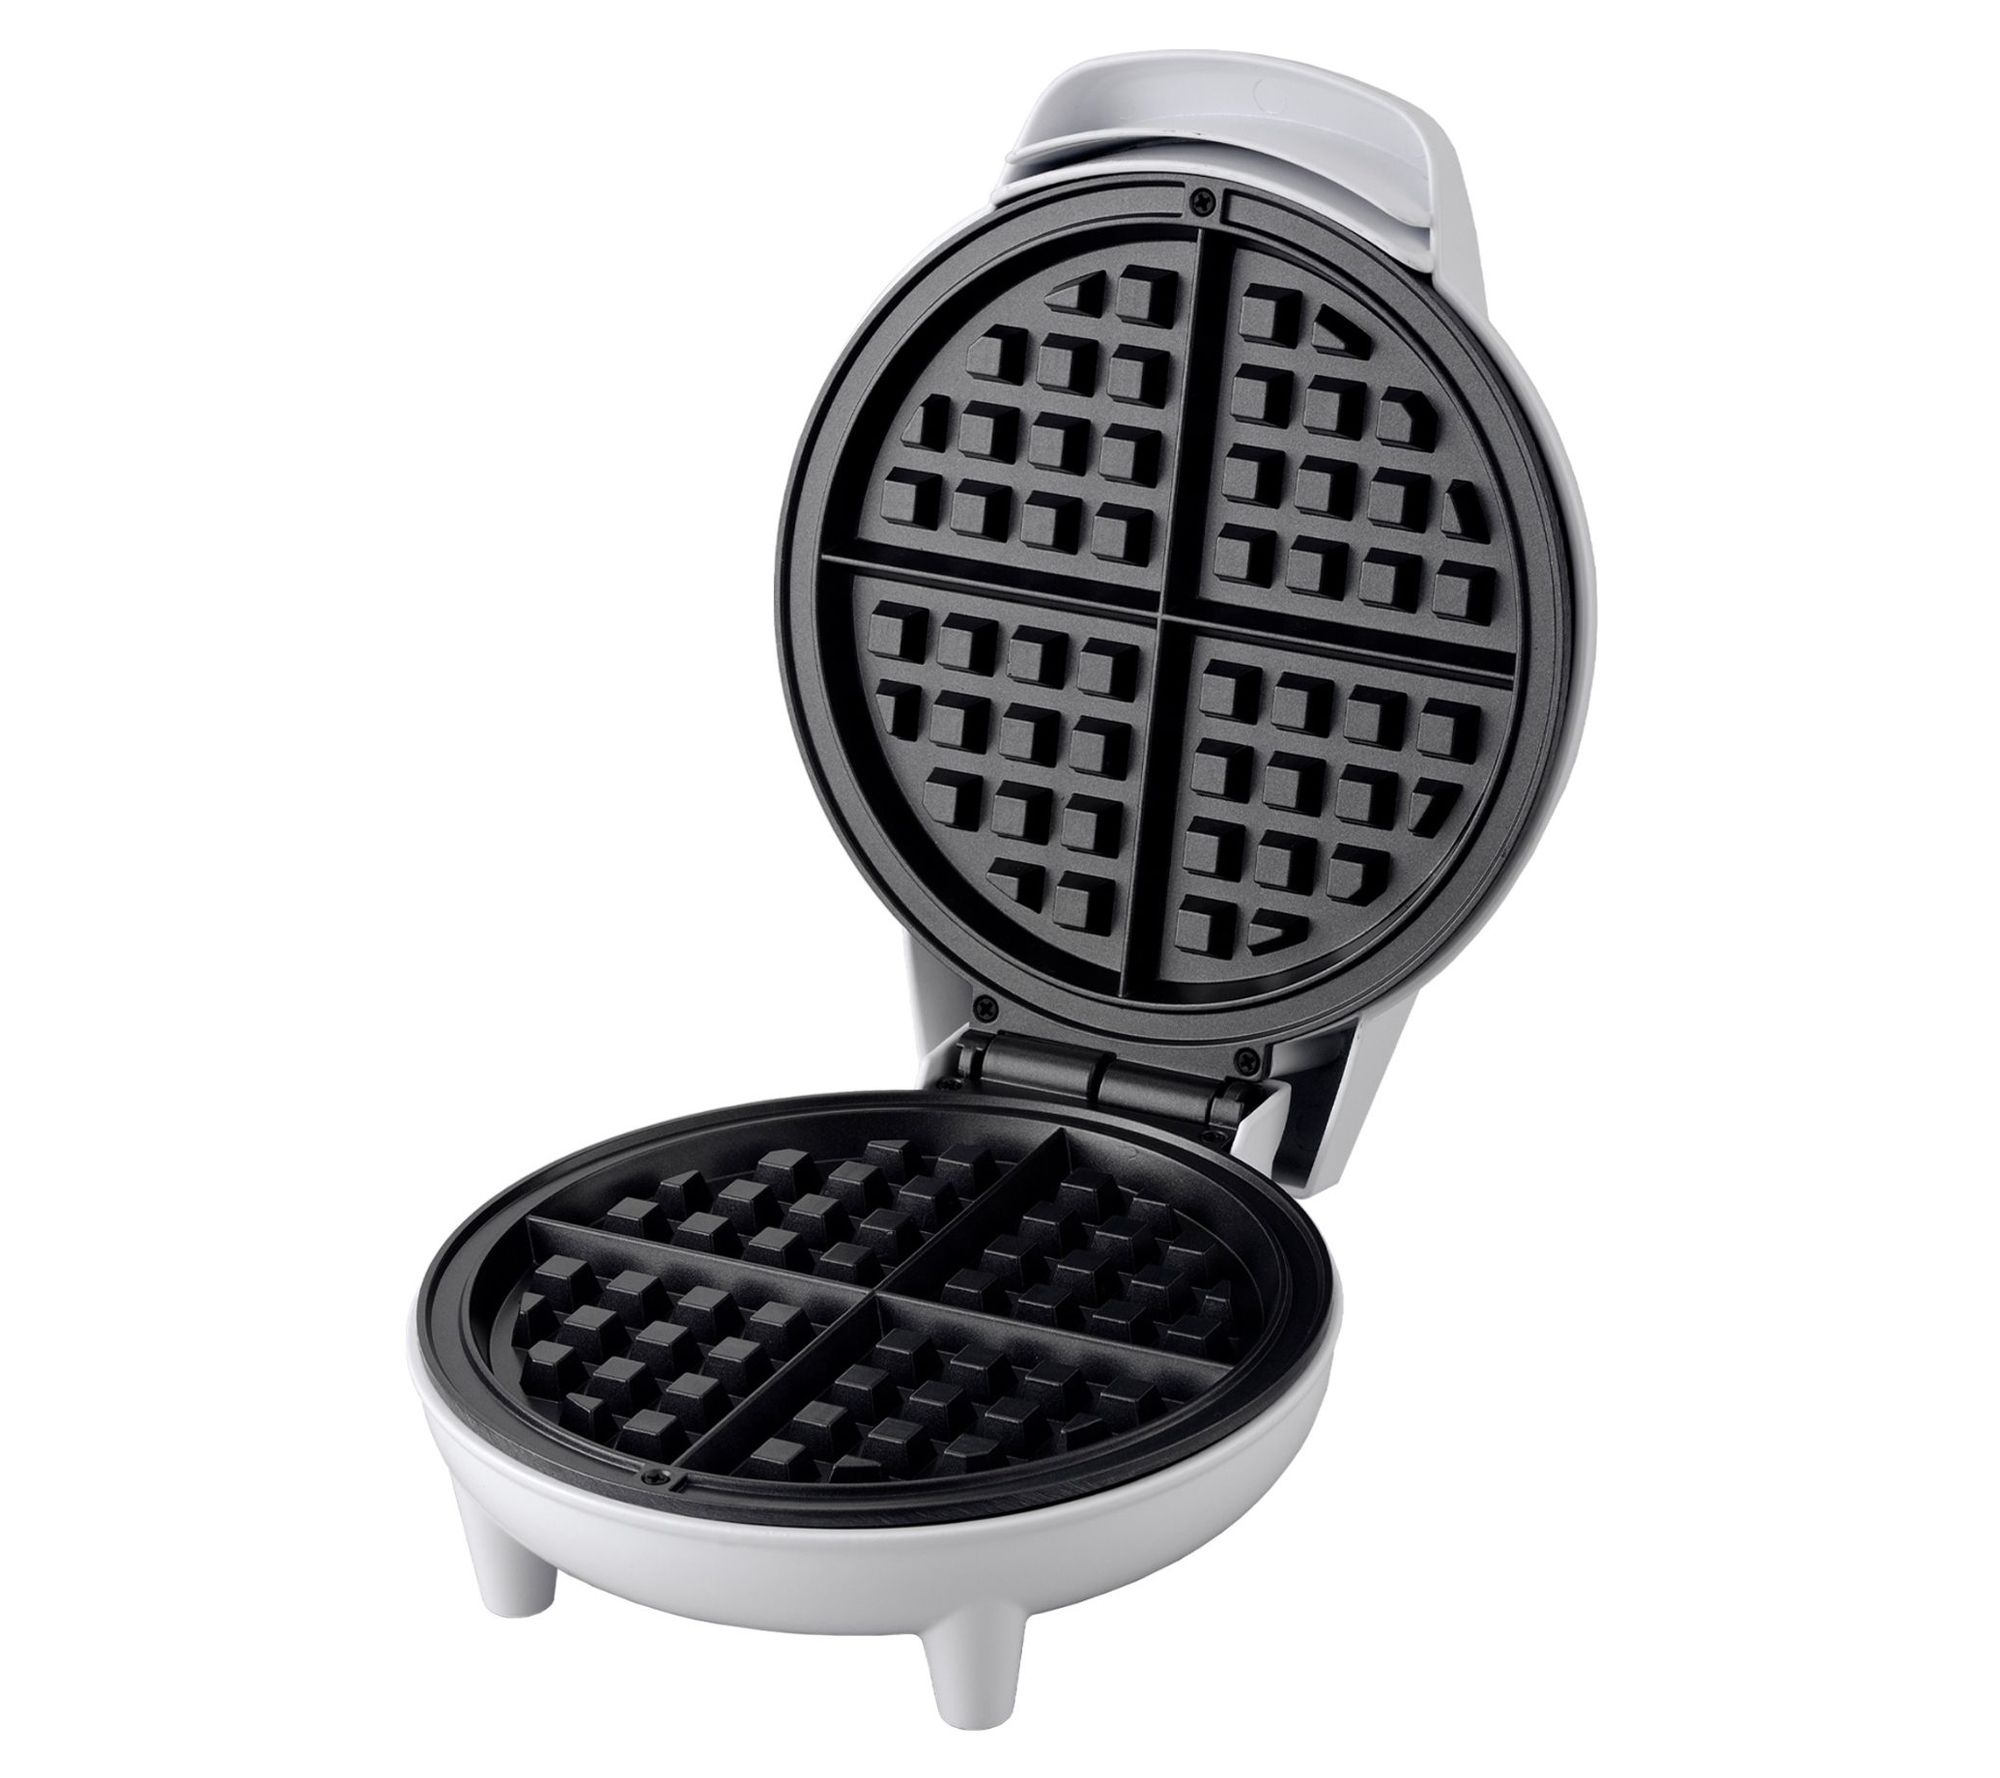 Courant 750 Watts Single Waffle White Belgian Waffle Maker 7 in. Round Waffles in Less Then 5-Minutes Delicious Waffles